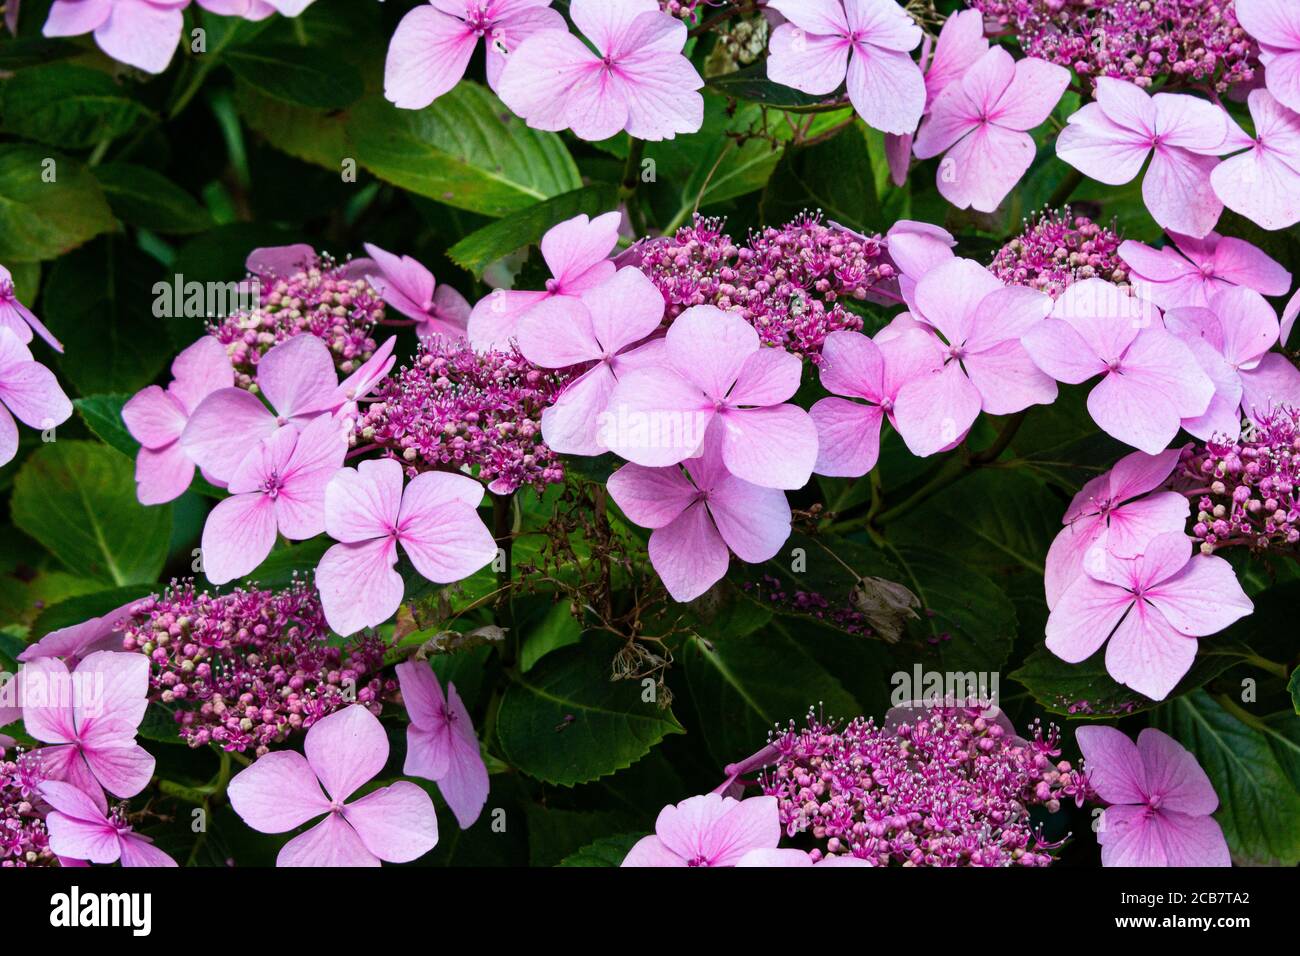 The flowers of a pink lace cap hydrangea Stock Photo